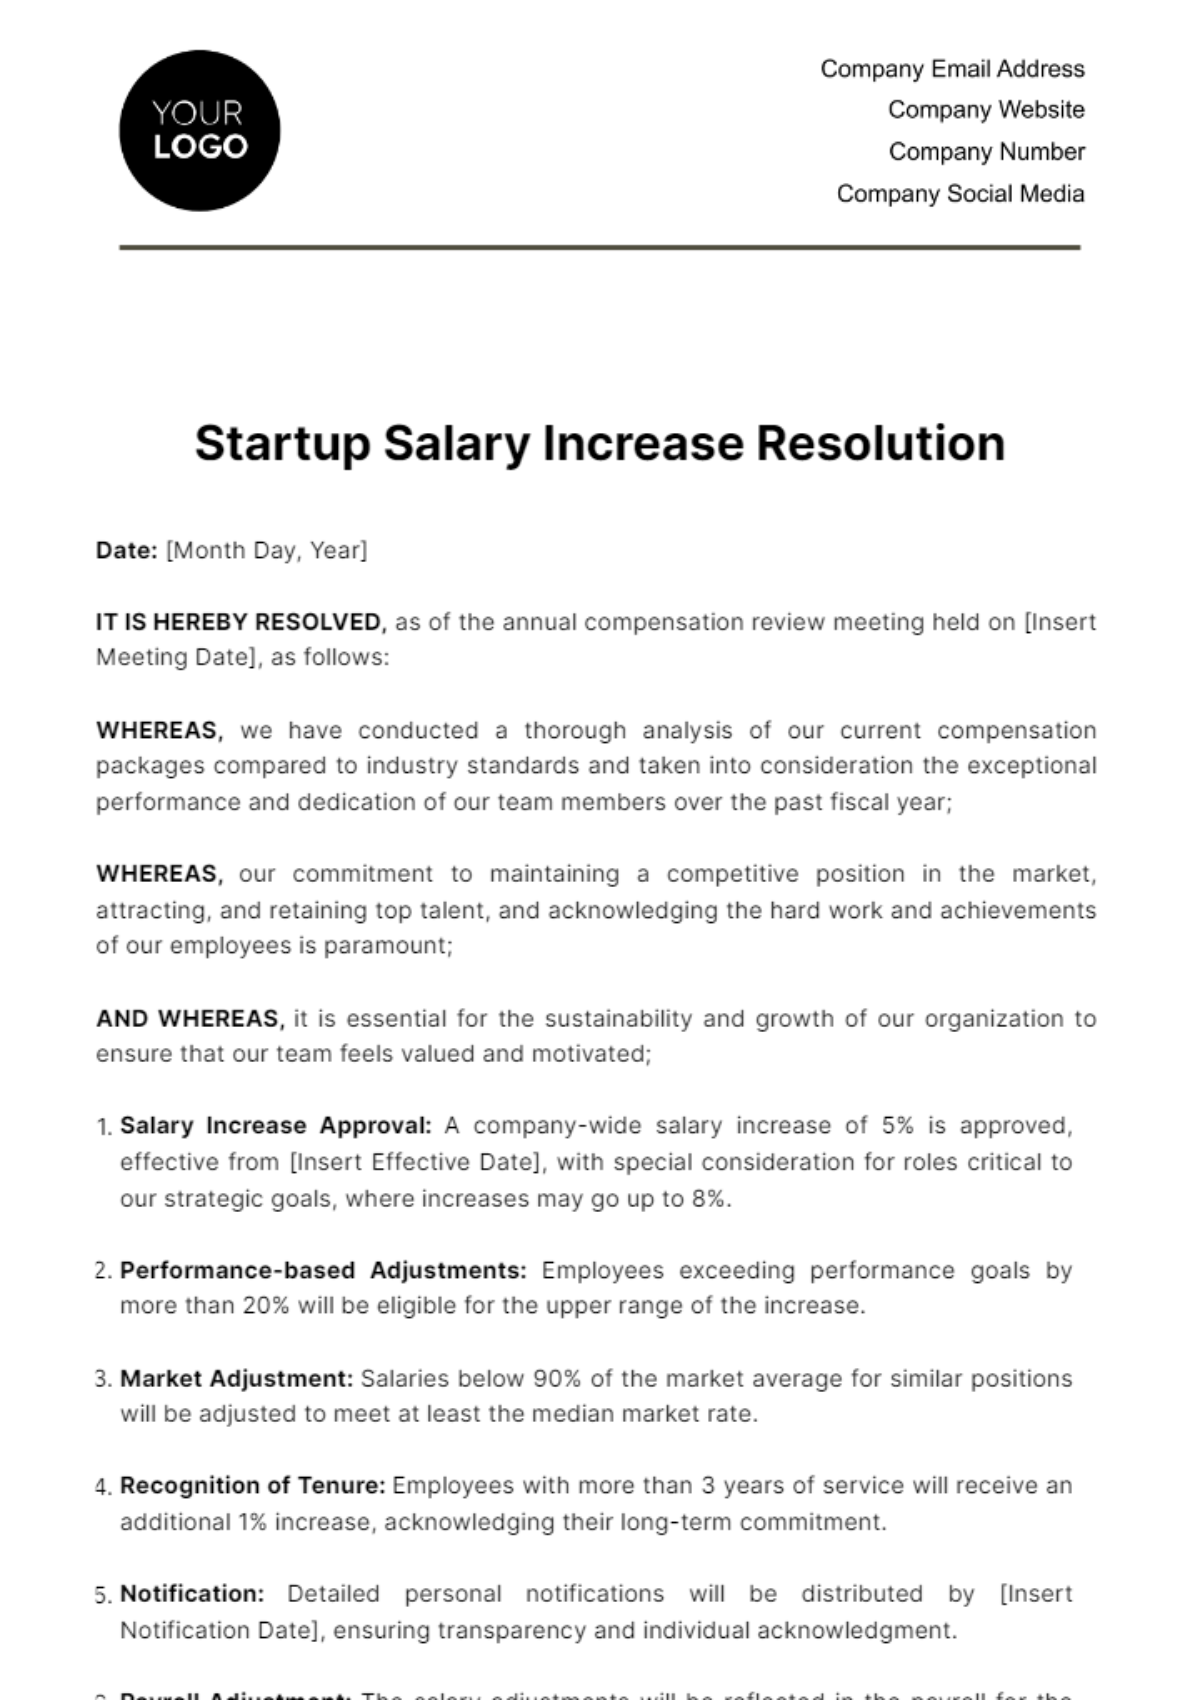 Free Startup Salary Increase Resolution Template